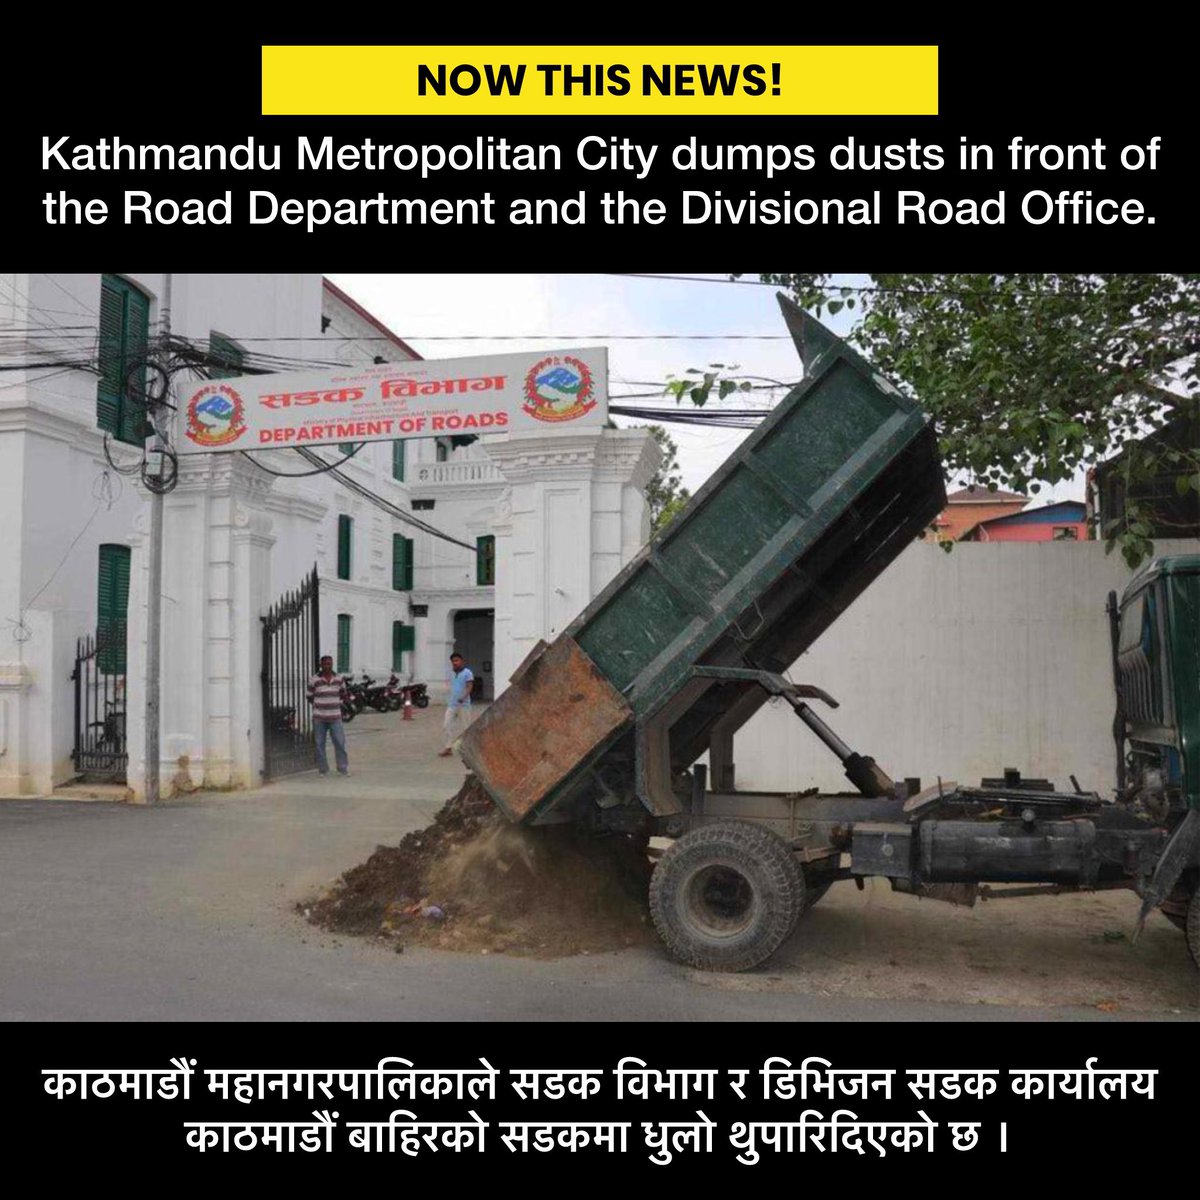 VERY APPRECIATIVE 👏🏼: The Kathmandu Metropolitan City has dumped garbage in front of the Road Department and the Divisional Road Office. 

Thoughts?
#nonextquestion